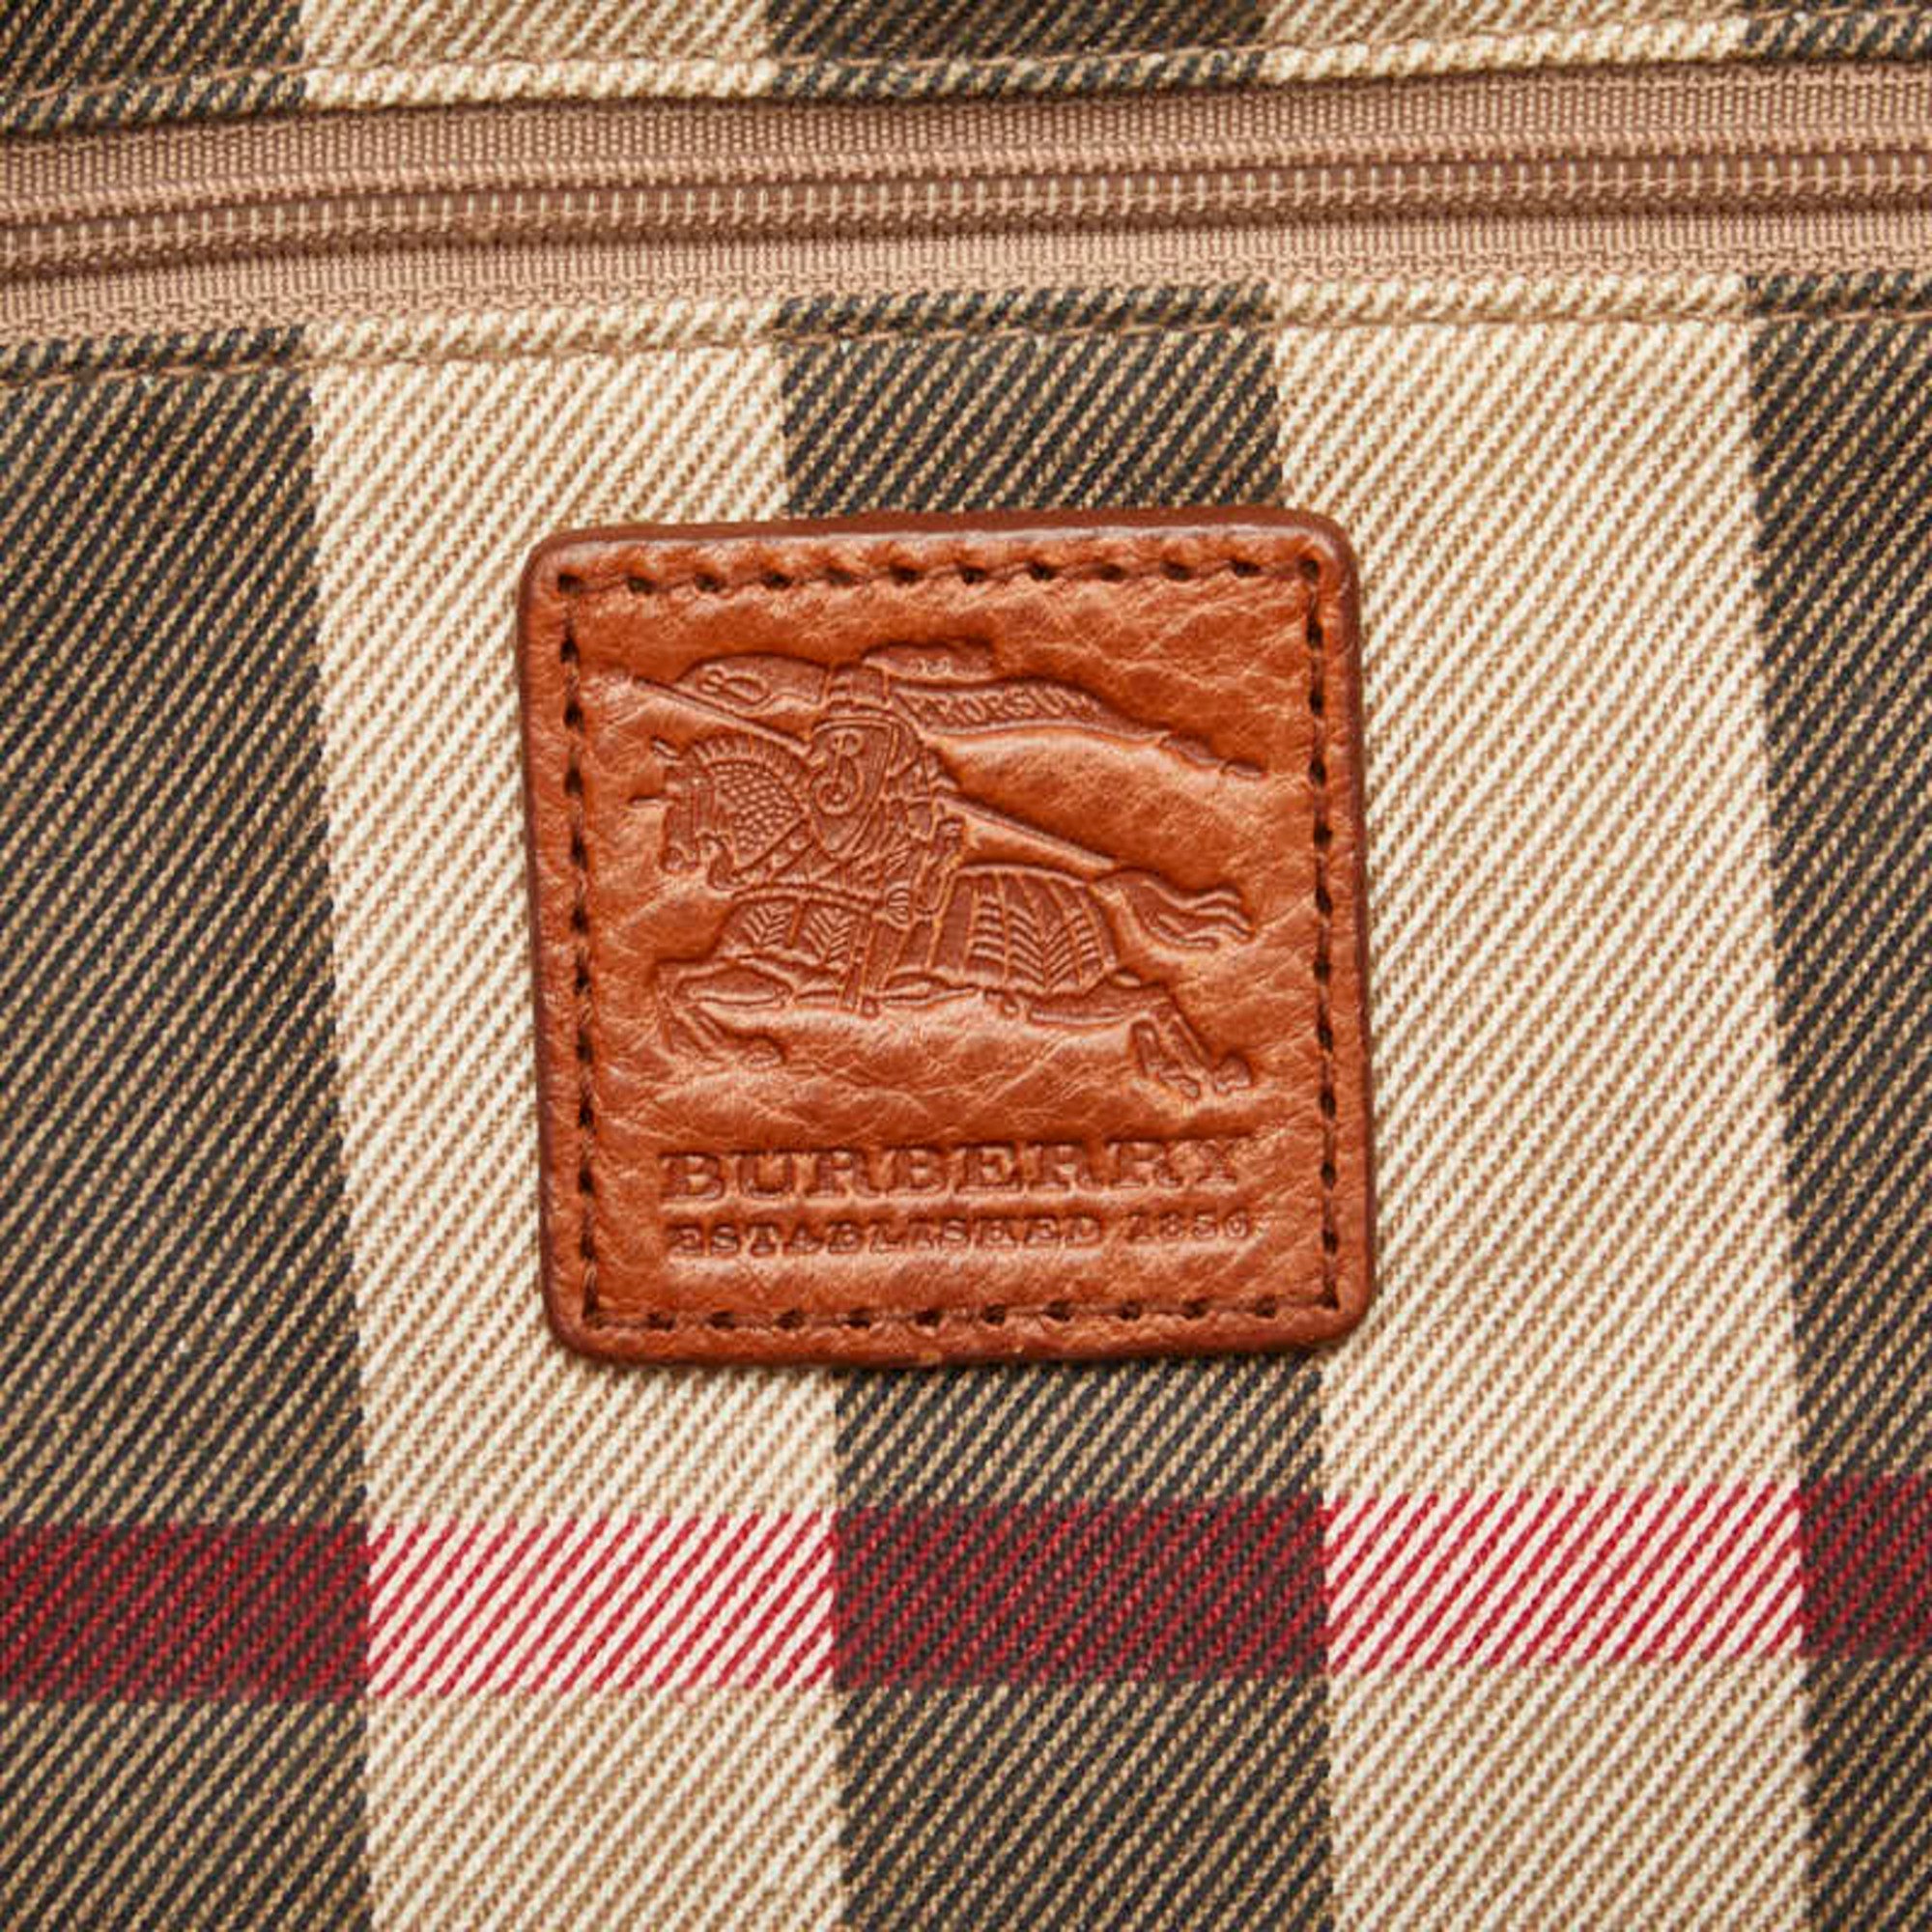 Burberry Nova Check Horse Embroidery Tote Bag Beige Brown Canvas Leather Women's BURBERRY